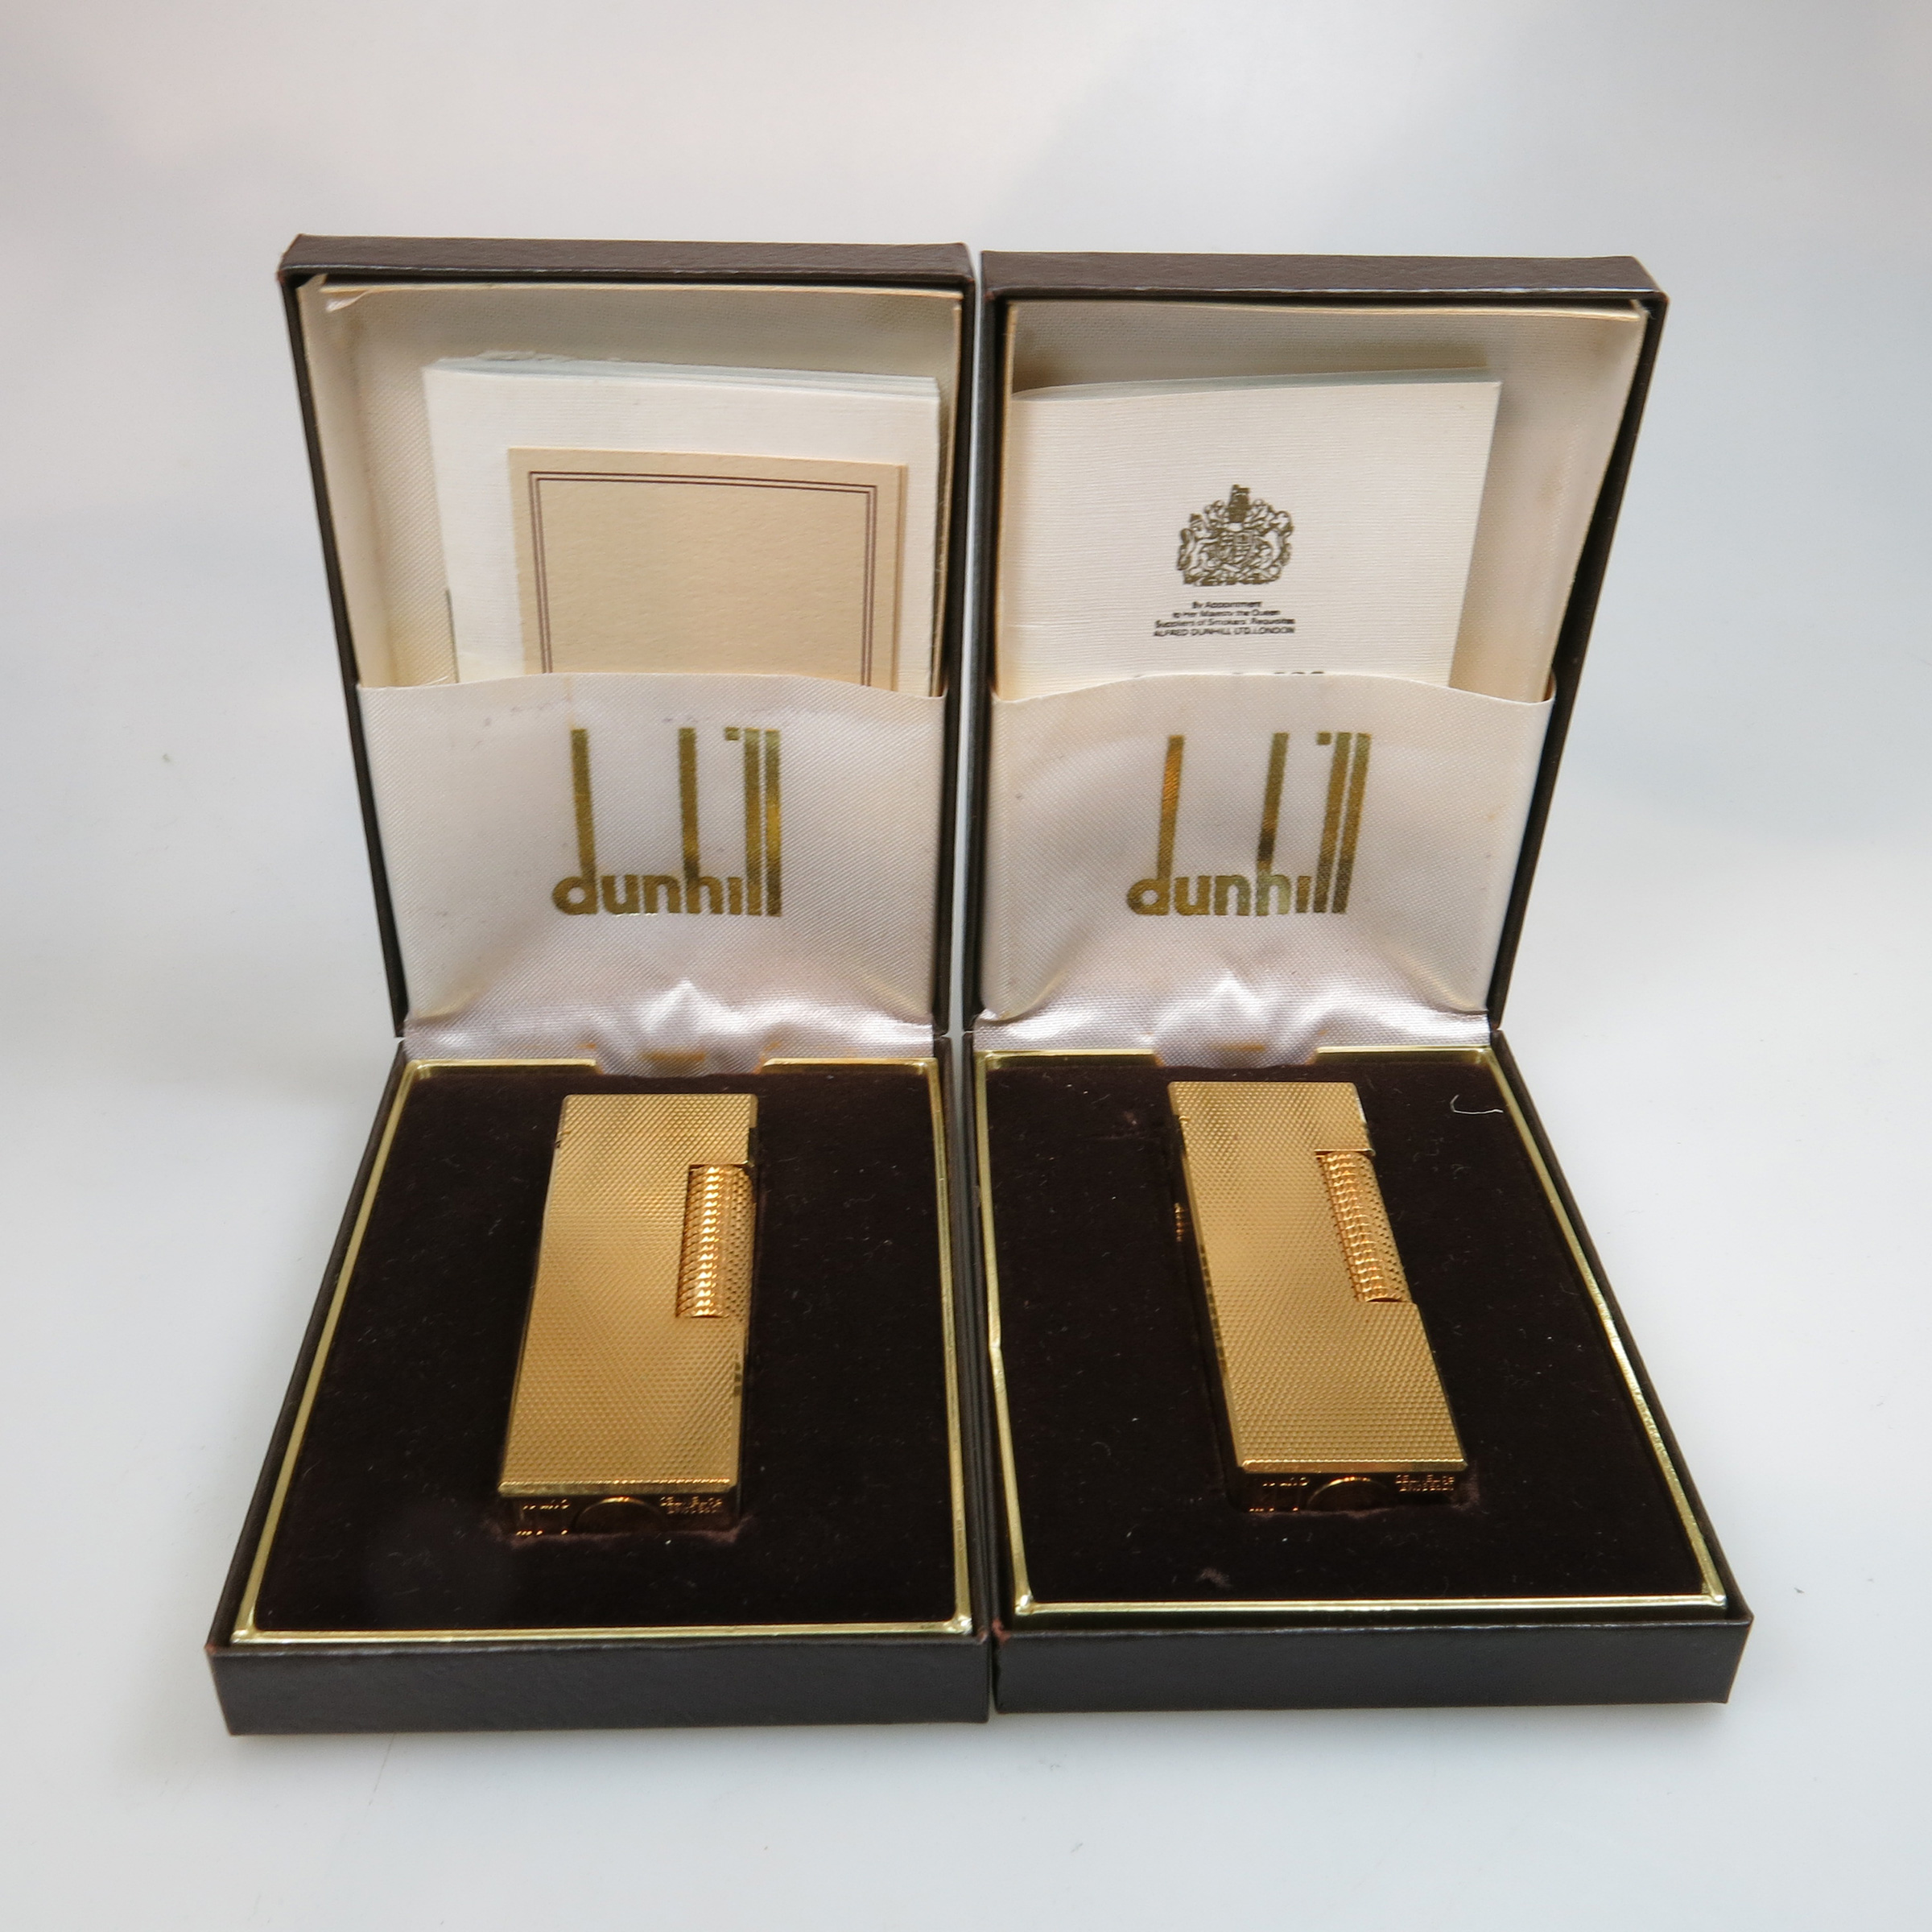 2 Dunhill Rollagas Gold-Plated Lighters